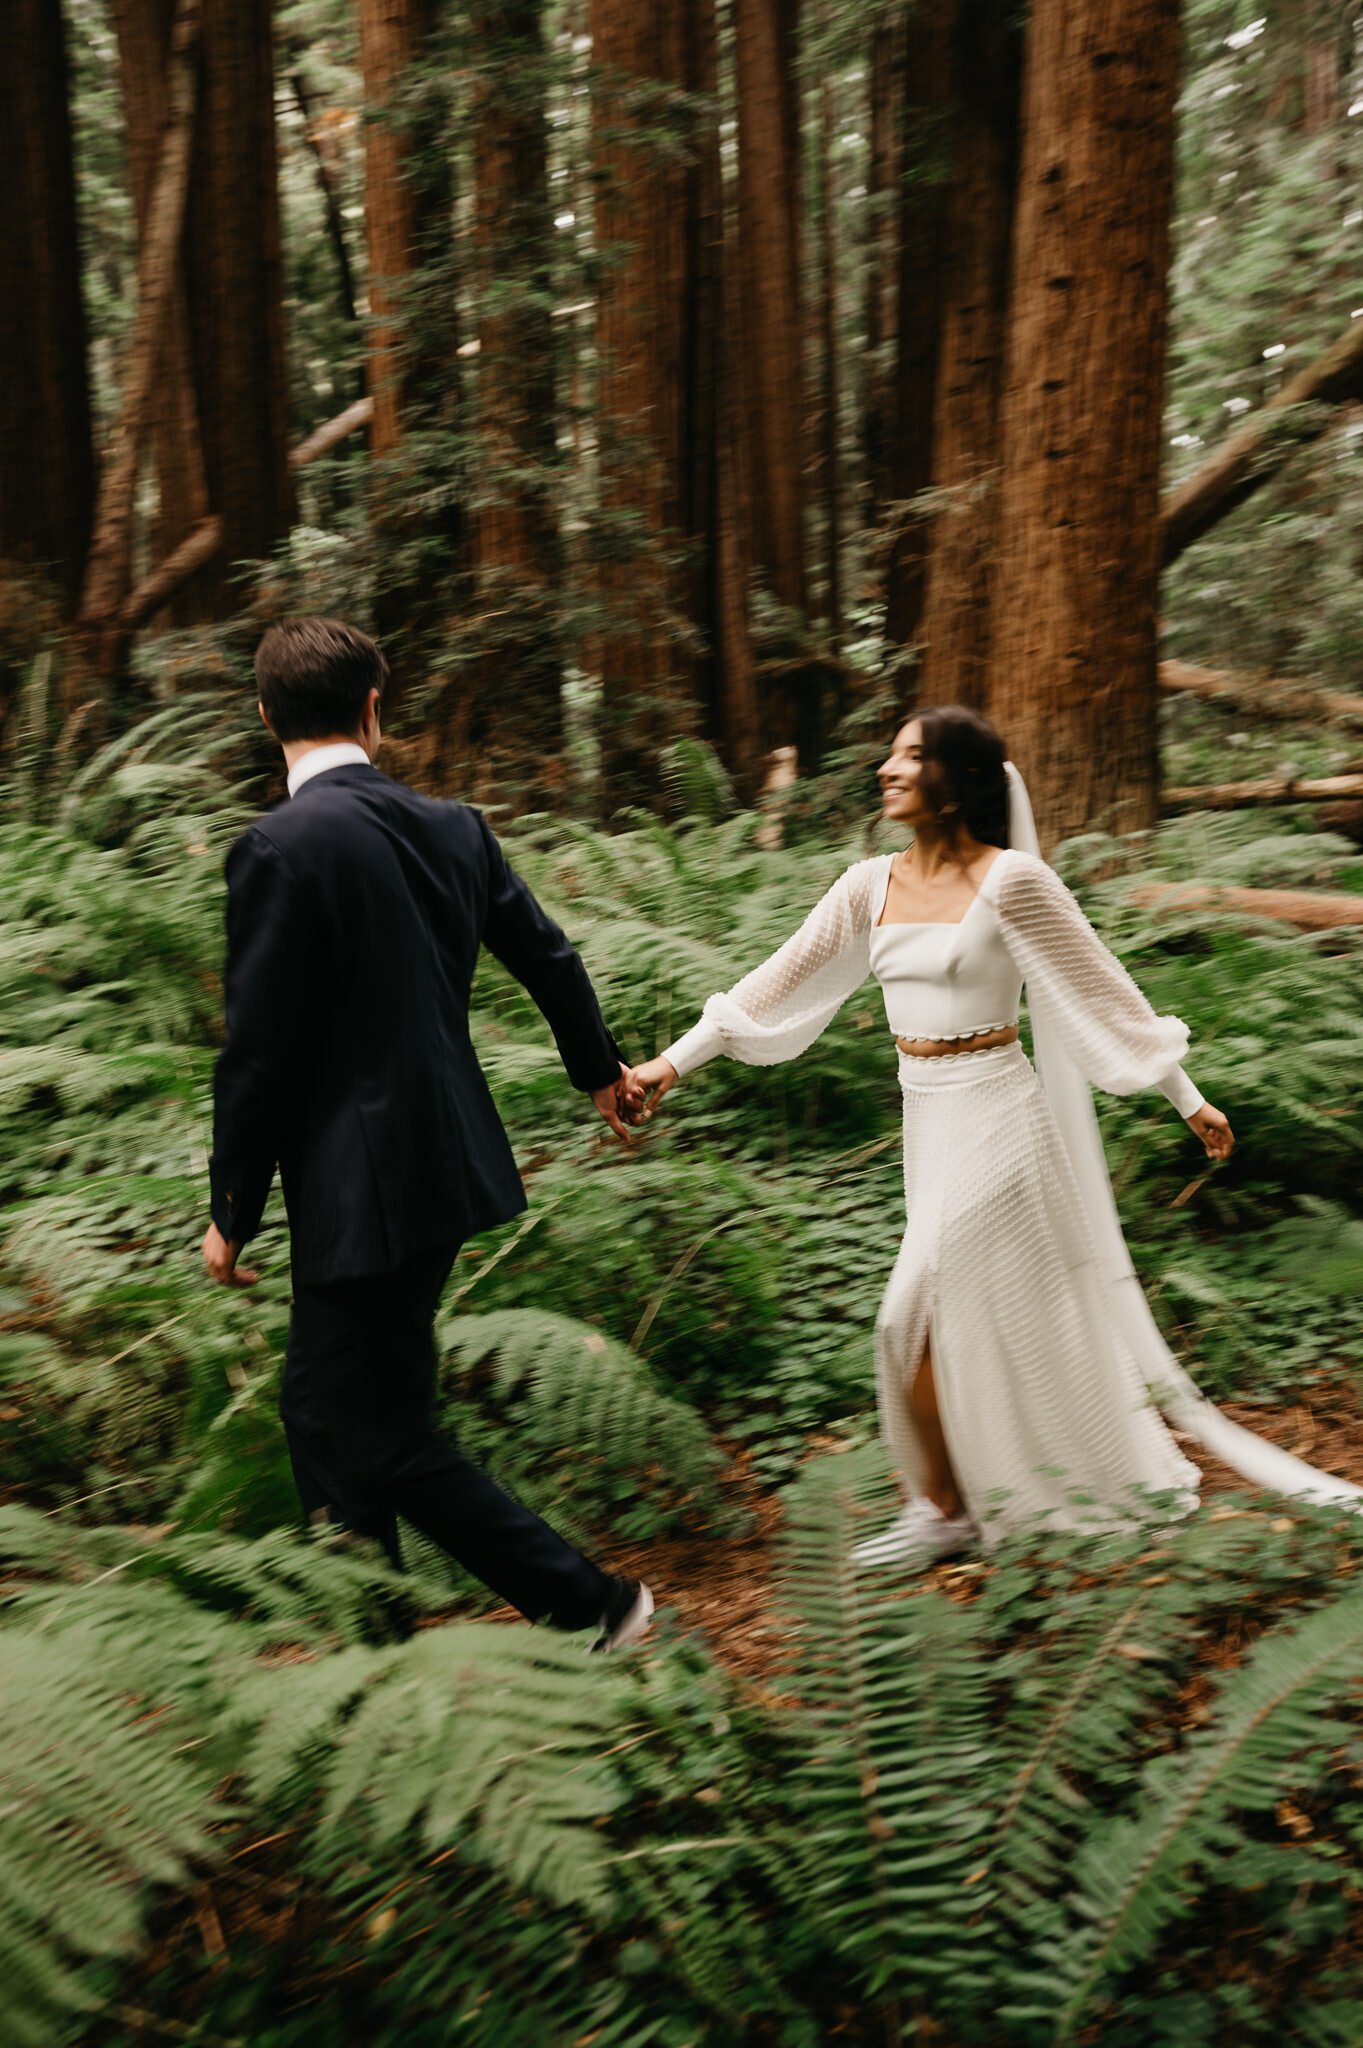 Newly married couple holding hands walking through ferns after their forest elopement.